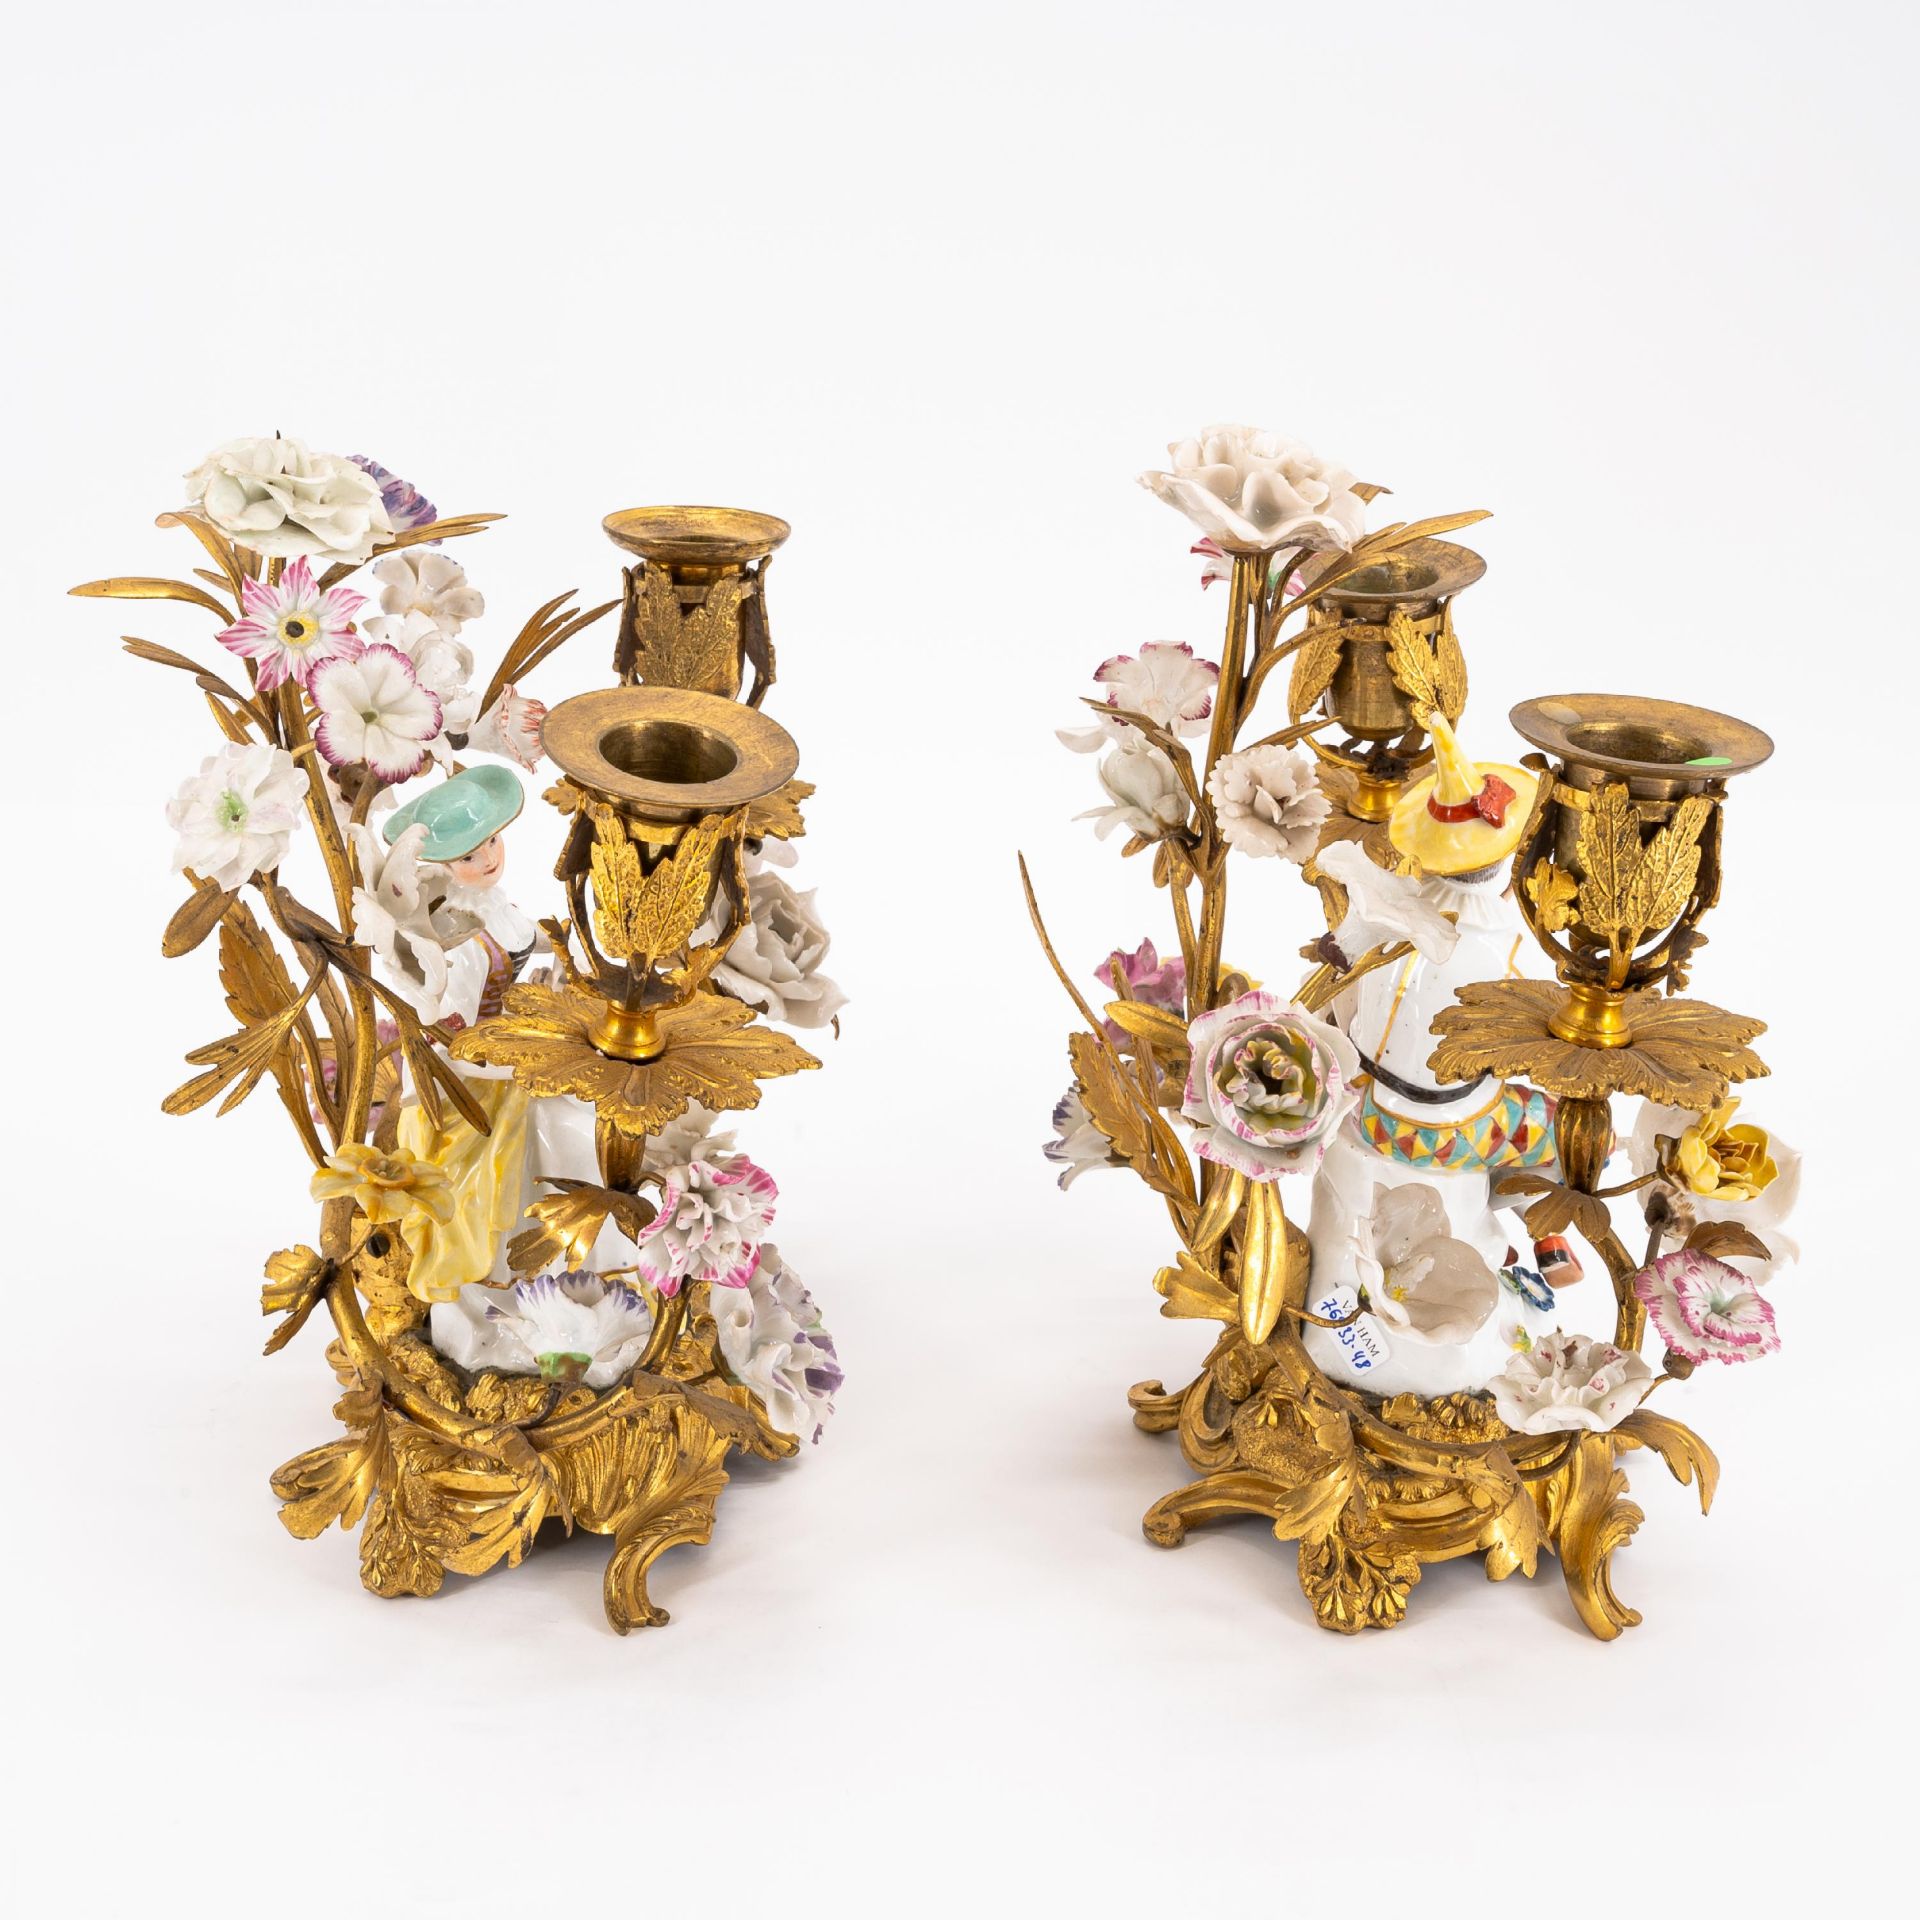 France: PAIR OF GILT BRONZE CANDELABRAS WITH TENDRIL BRANCHES AND PORCELAIN MUSICIANS - Image 4 of 5